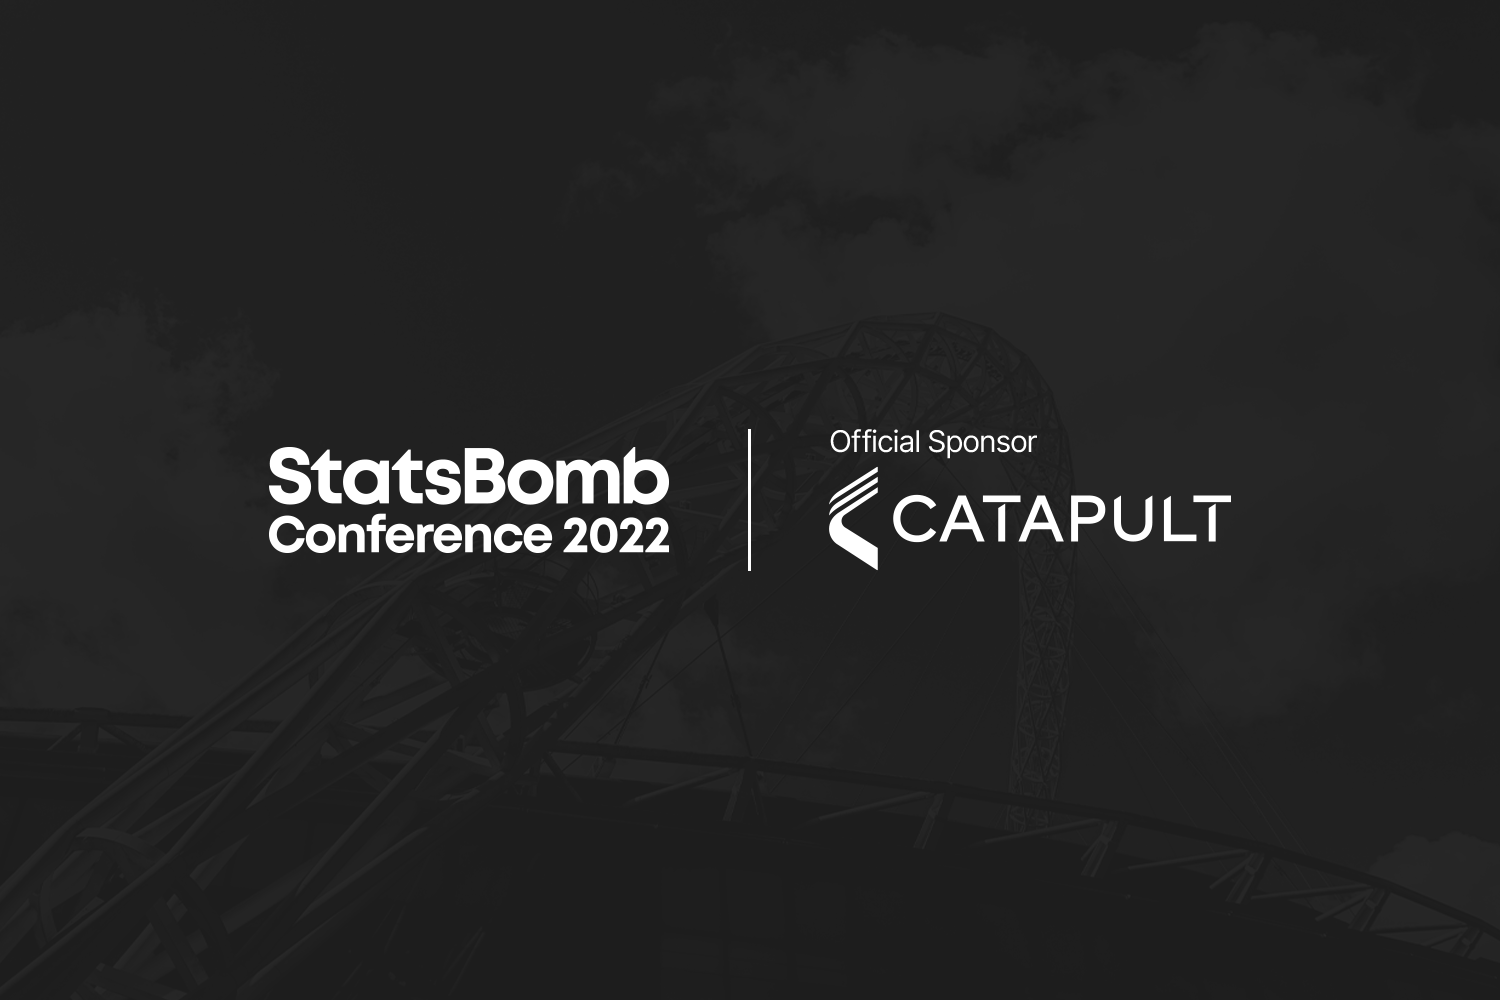 Catapult Returns As A Sponsor For StatsBomb’s Annual Football Analytics Conference